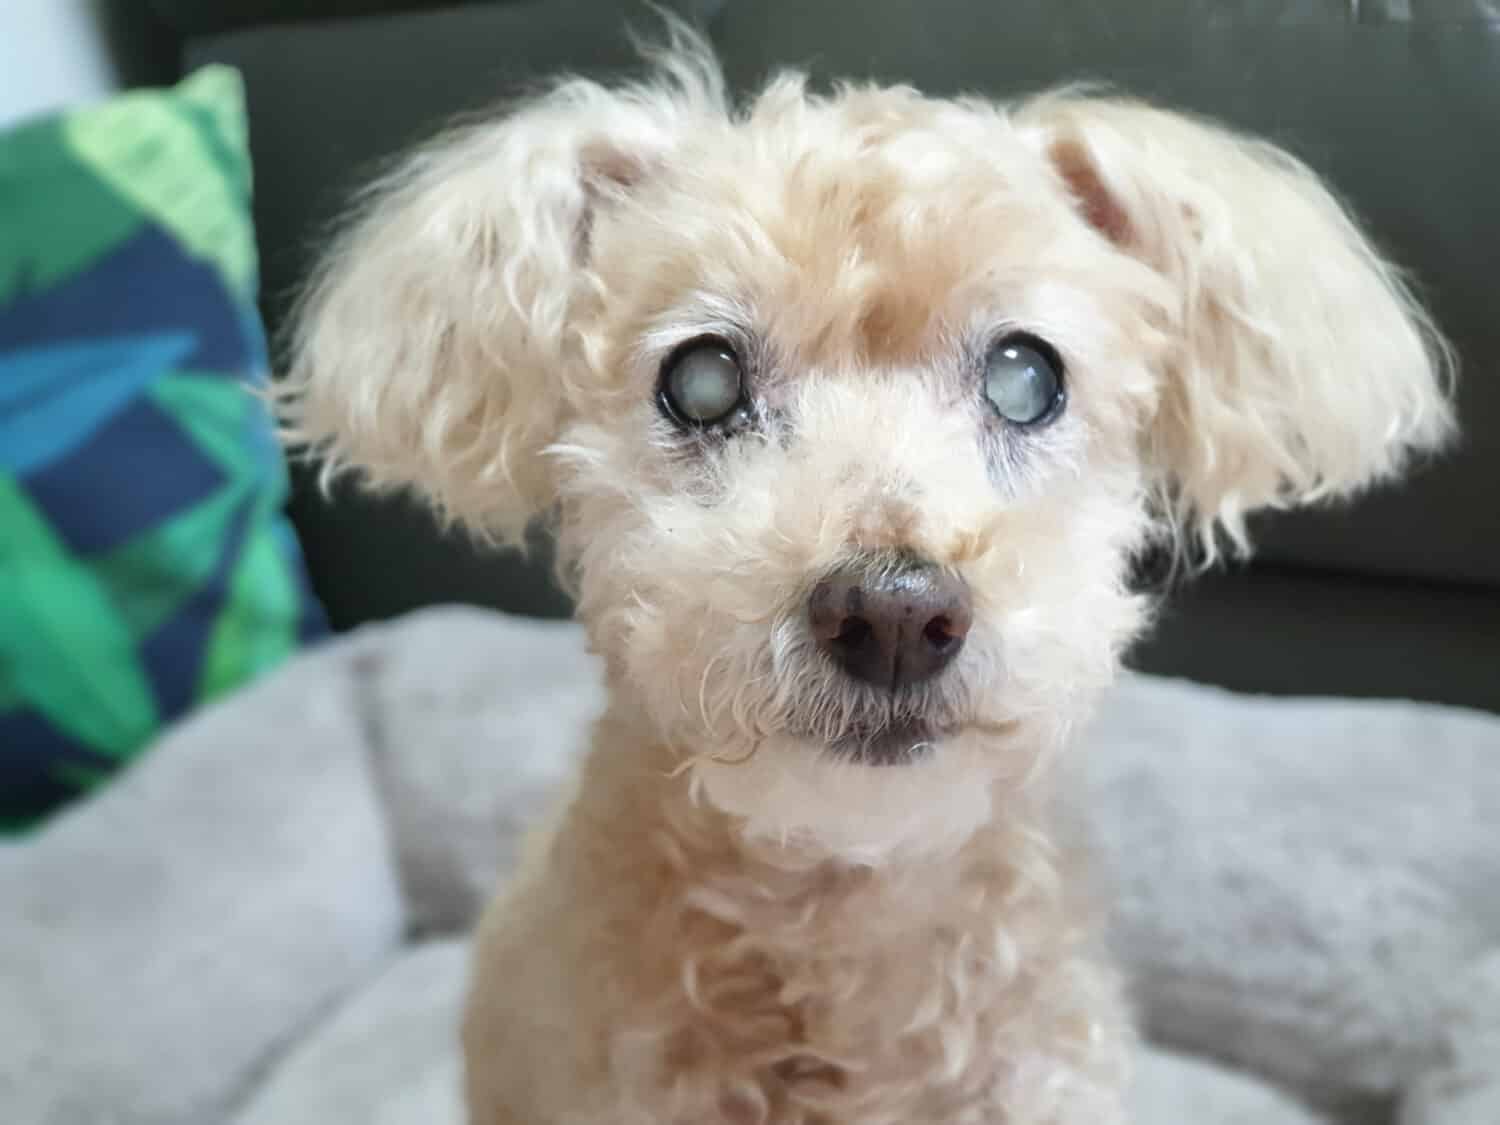 old blind poodle dog with cataracts in his eyes, Poodle sitting on cushion